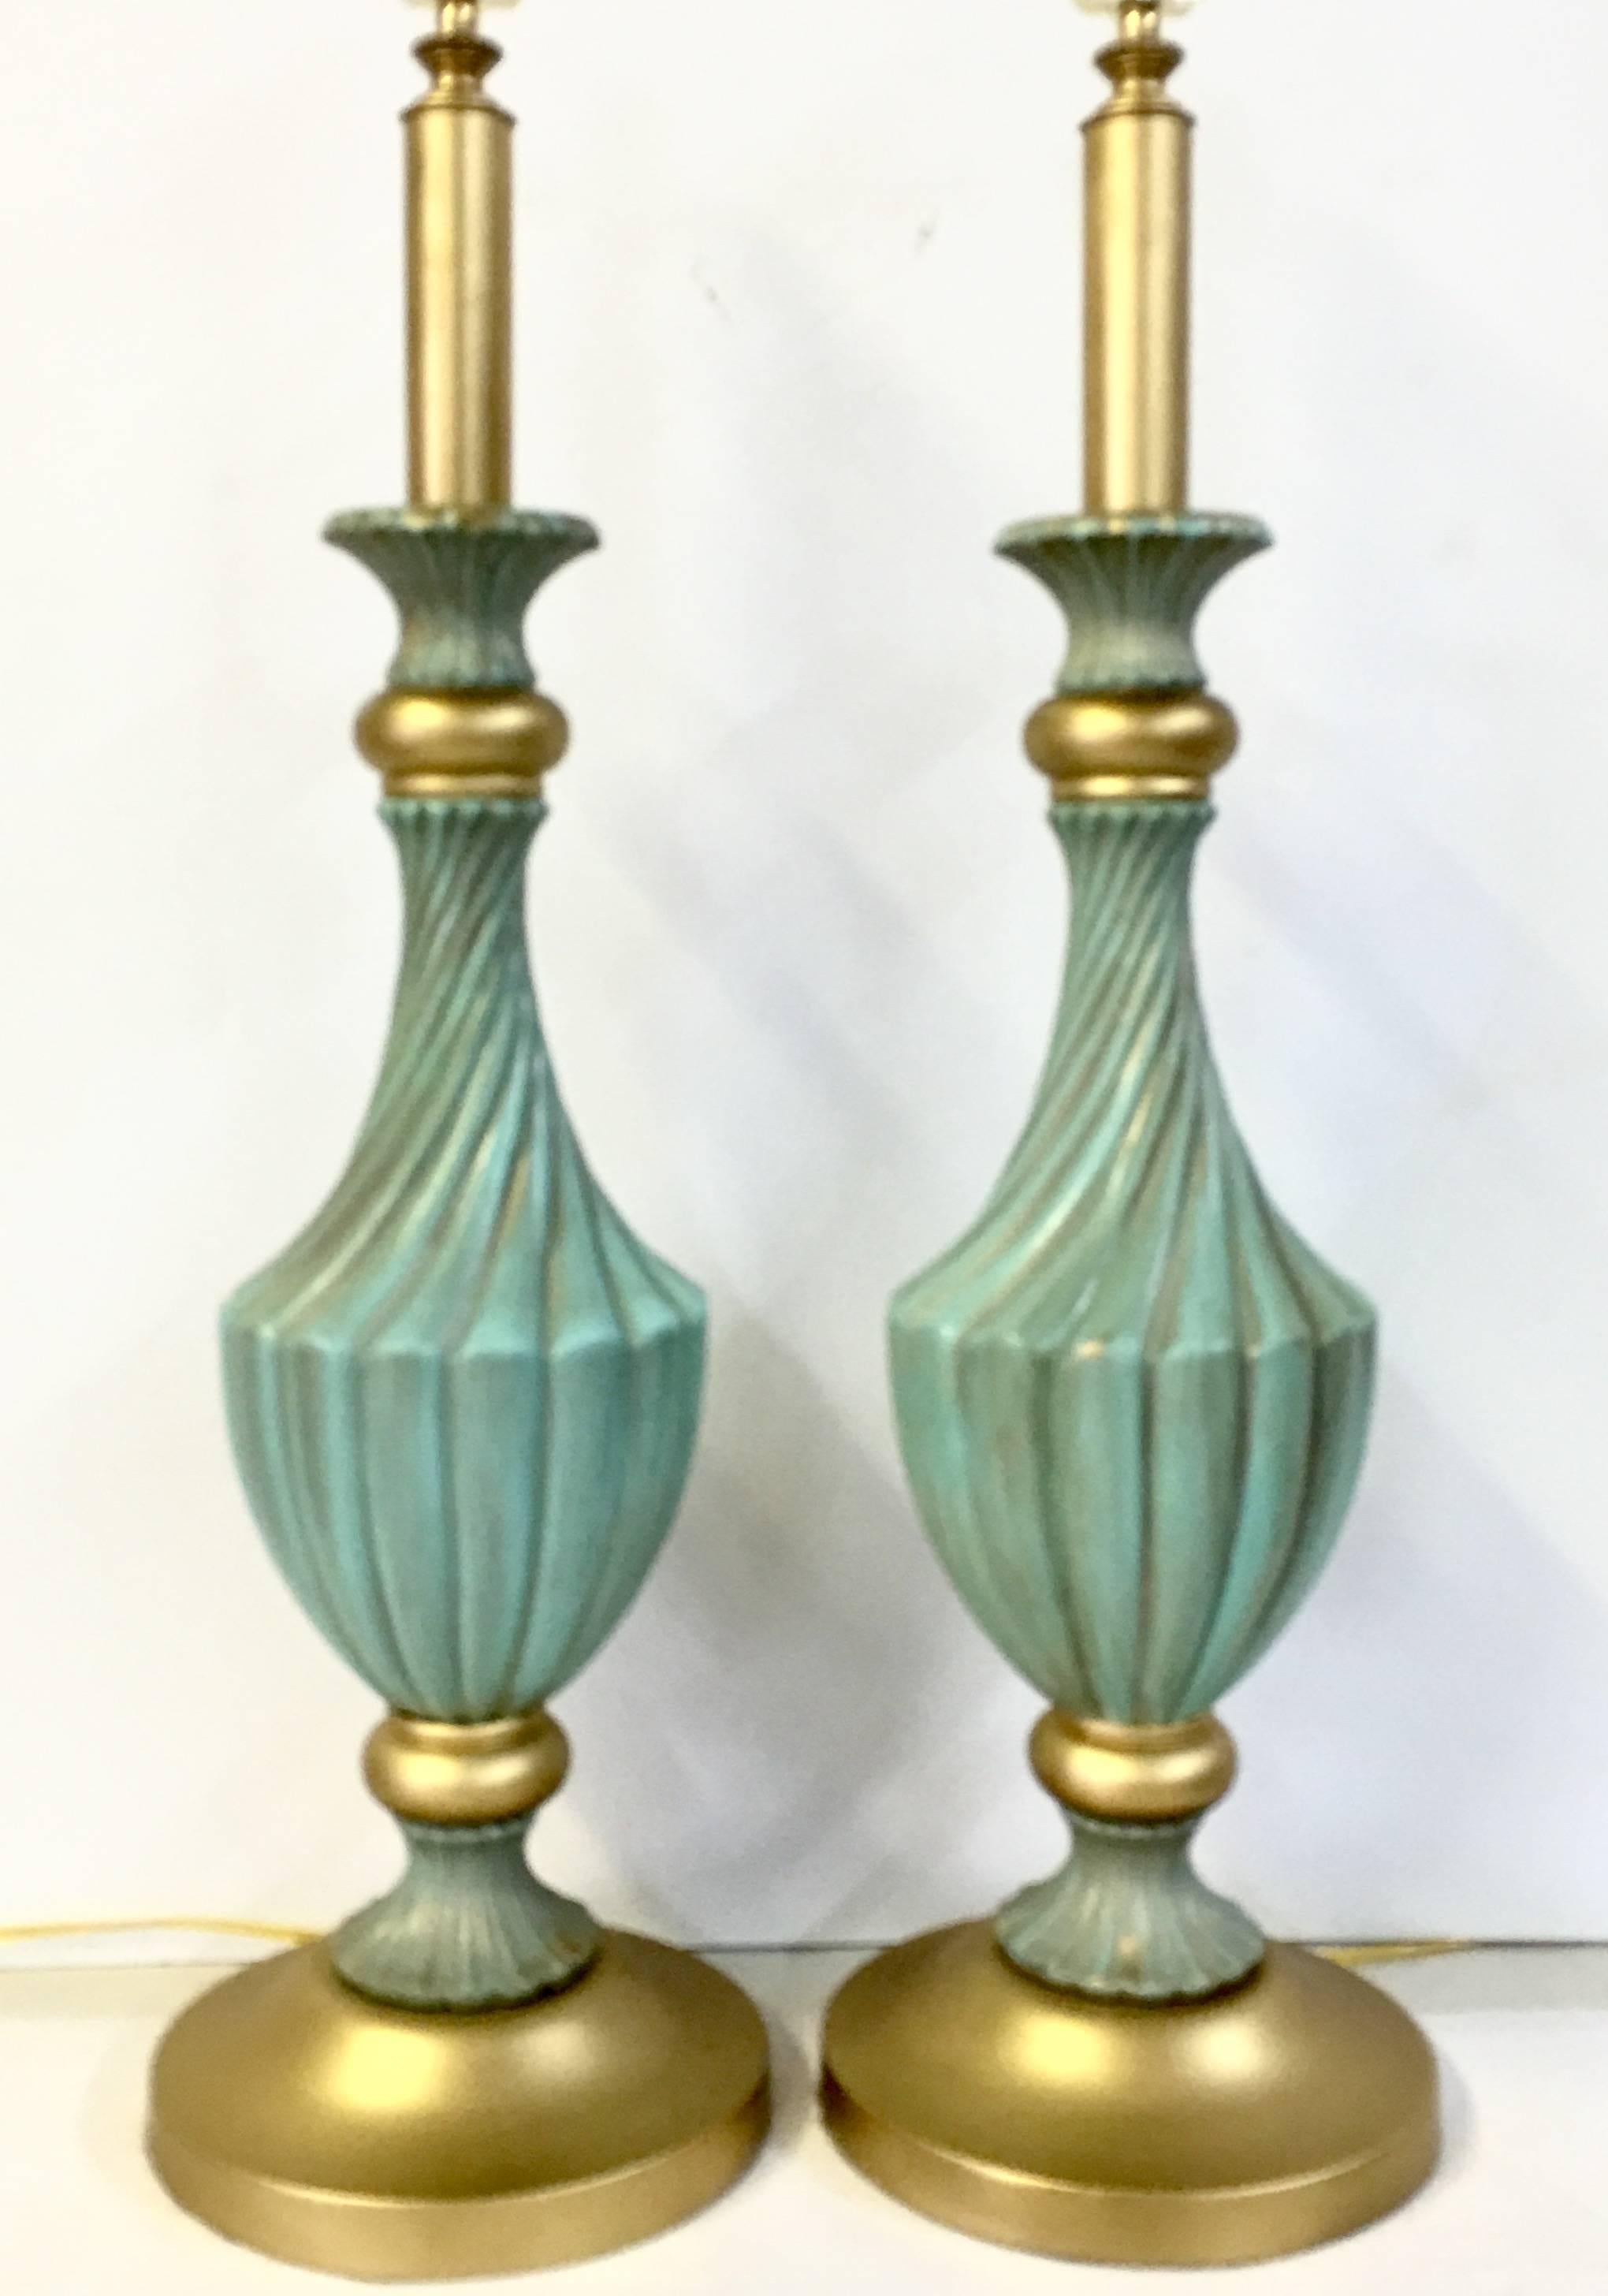 Pair of Stiffel style ceramic and brass painted gold gilt lamps. Neoclassical style twist body in aqua with gold fleck detail throughout. The brass fittings have been newly painted in gold gilt metallic, including the bases. Wired for the US, in